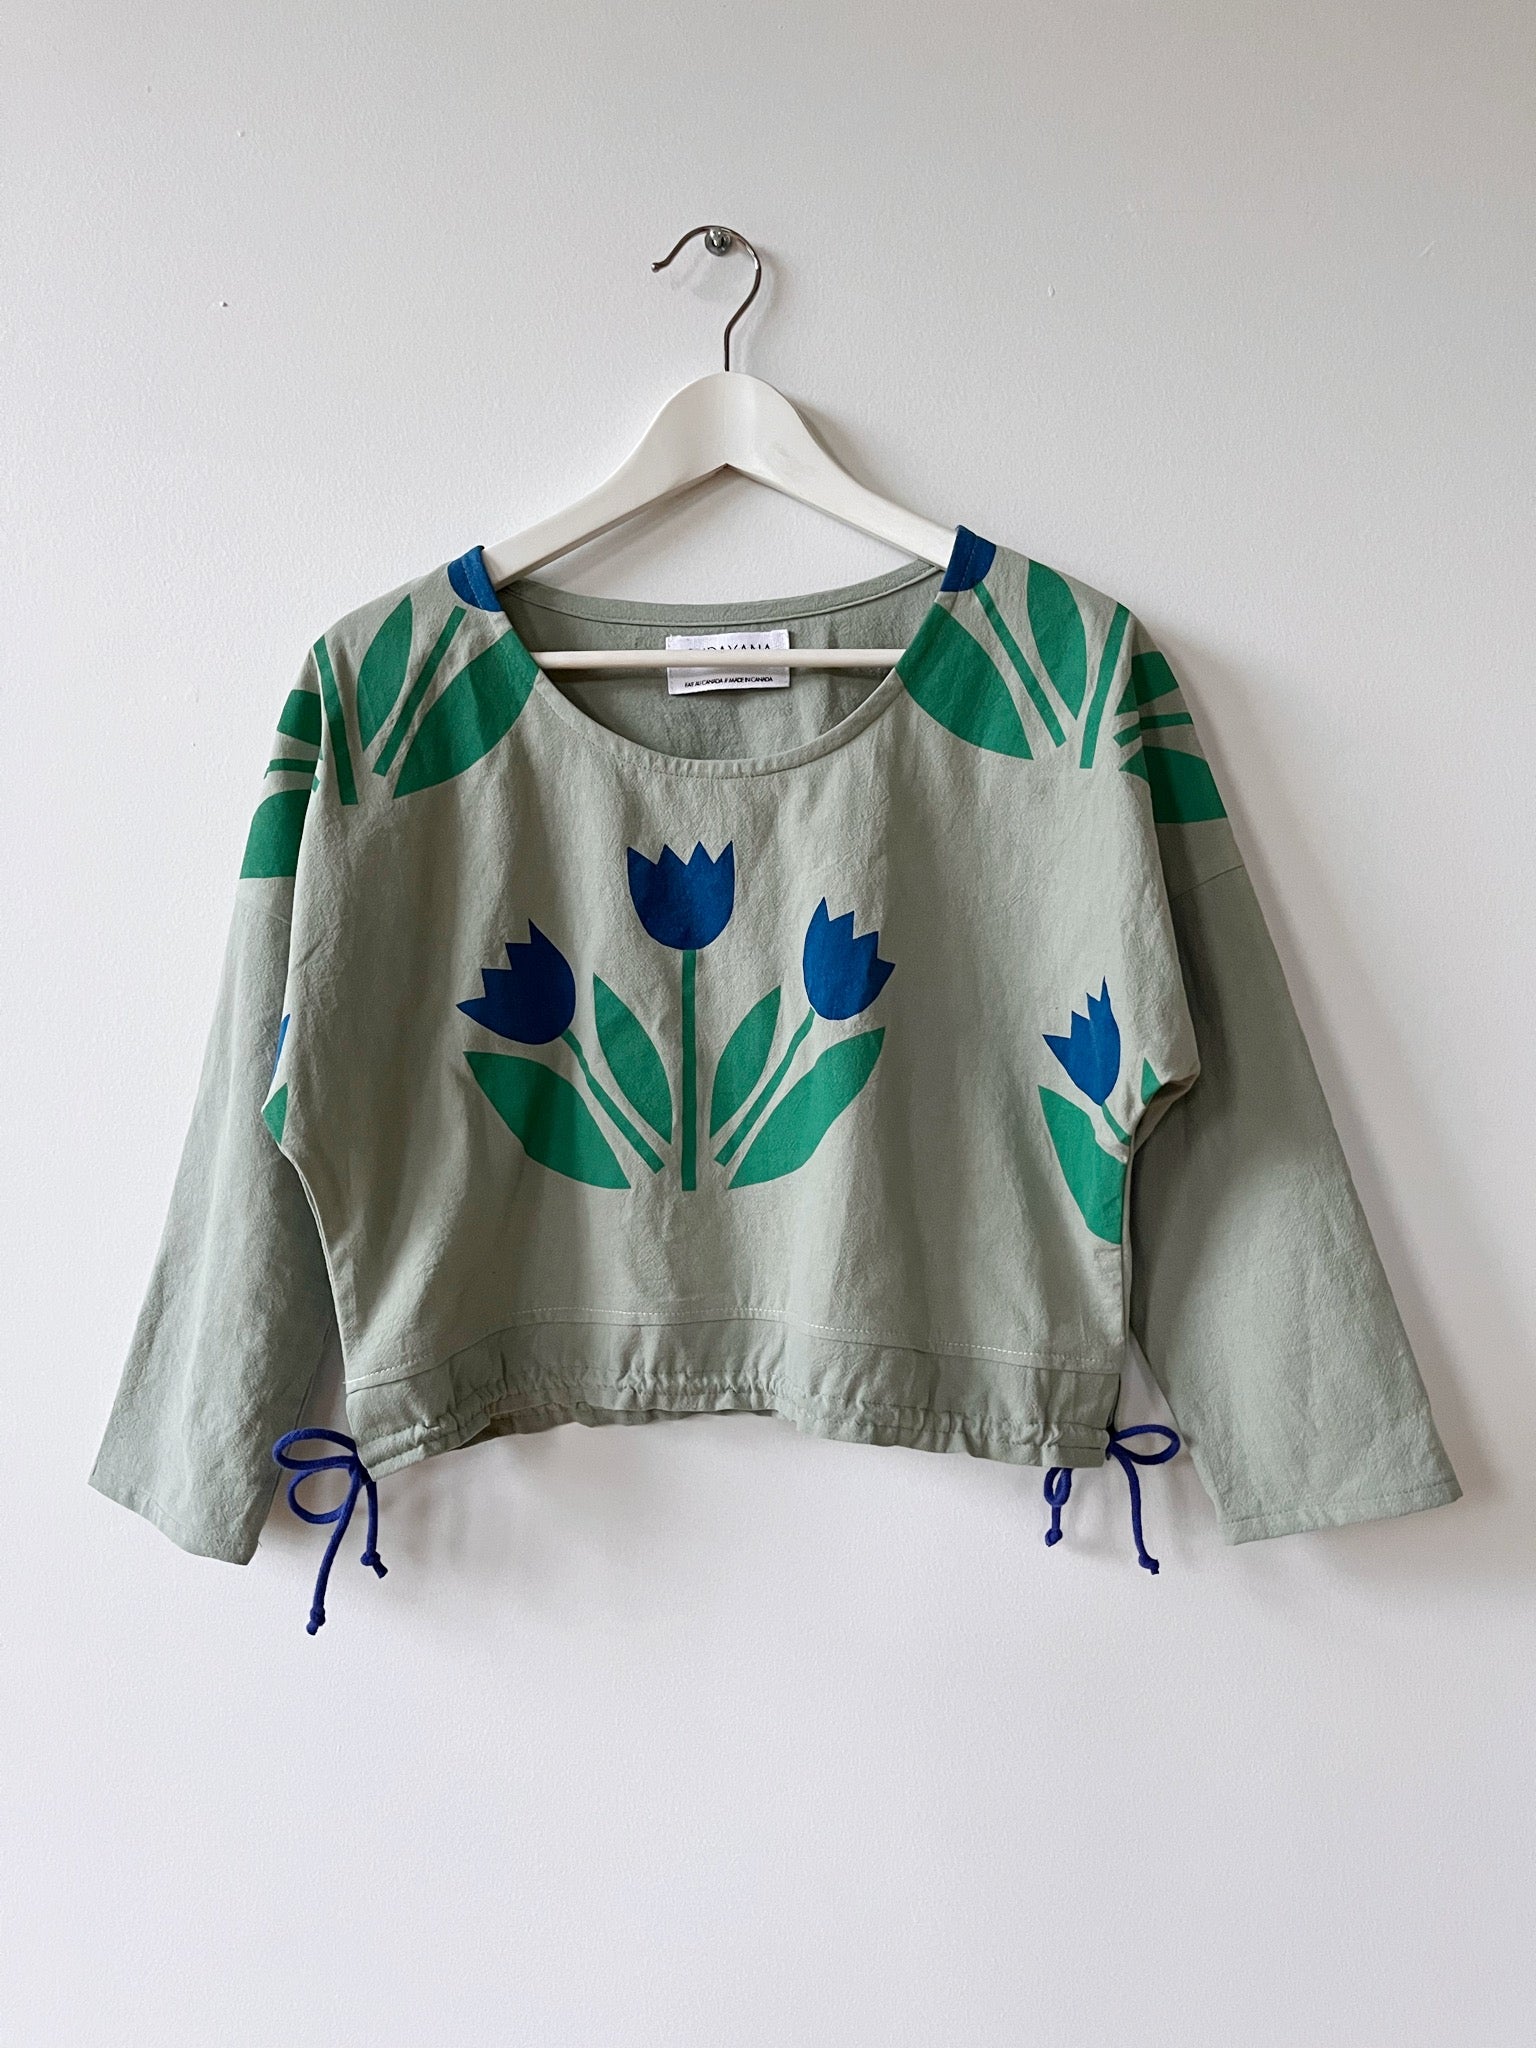 OOAK hand-printed tulip top XS-S Ready to ship